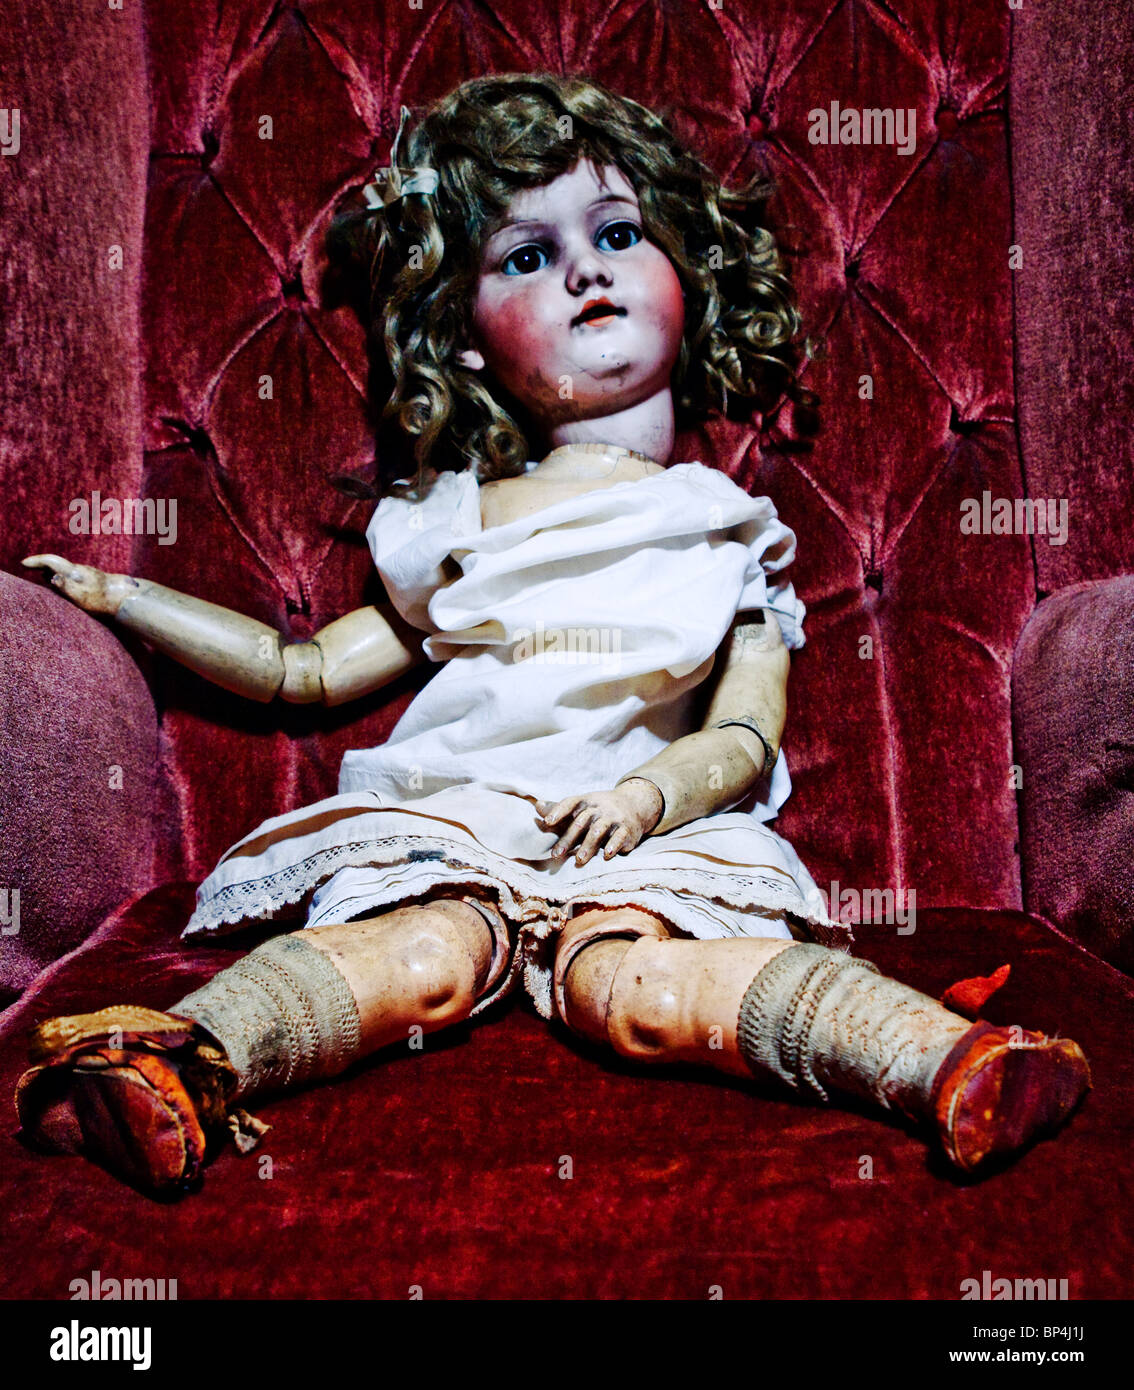 An old fashioned antique doll seated on a burgundy velvet sofa wearing a white dress. Stock Photo